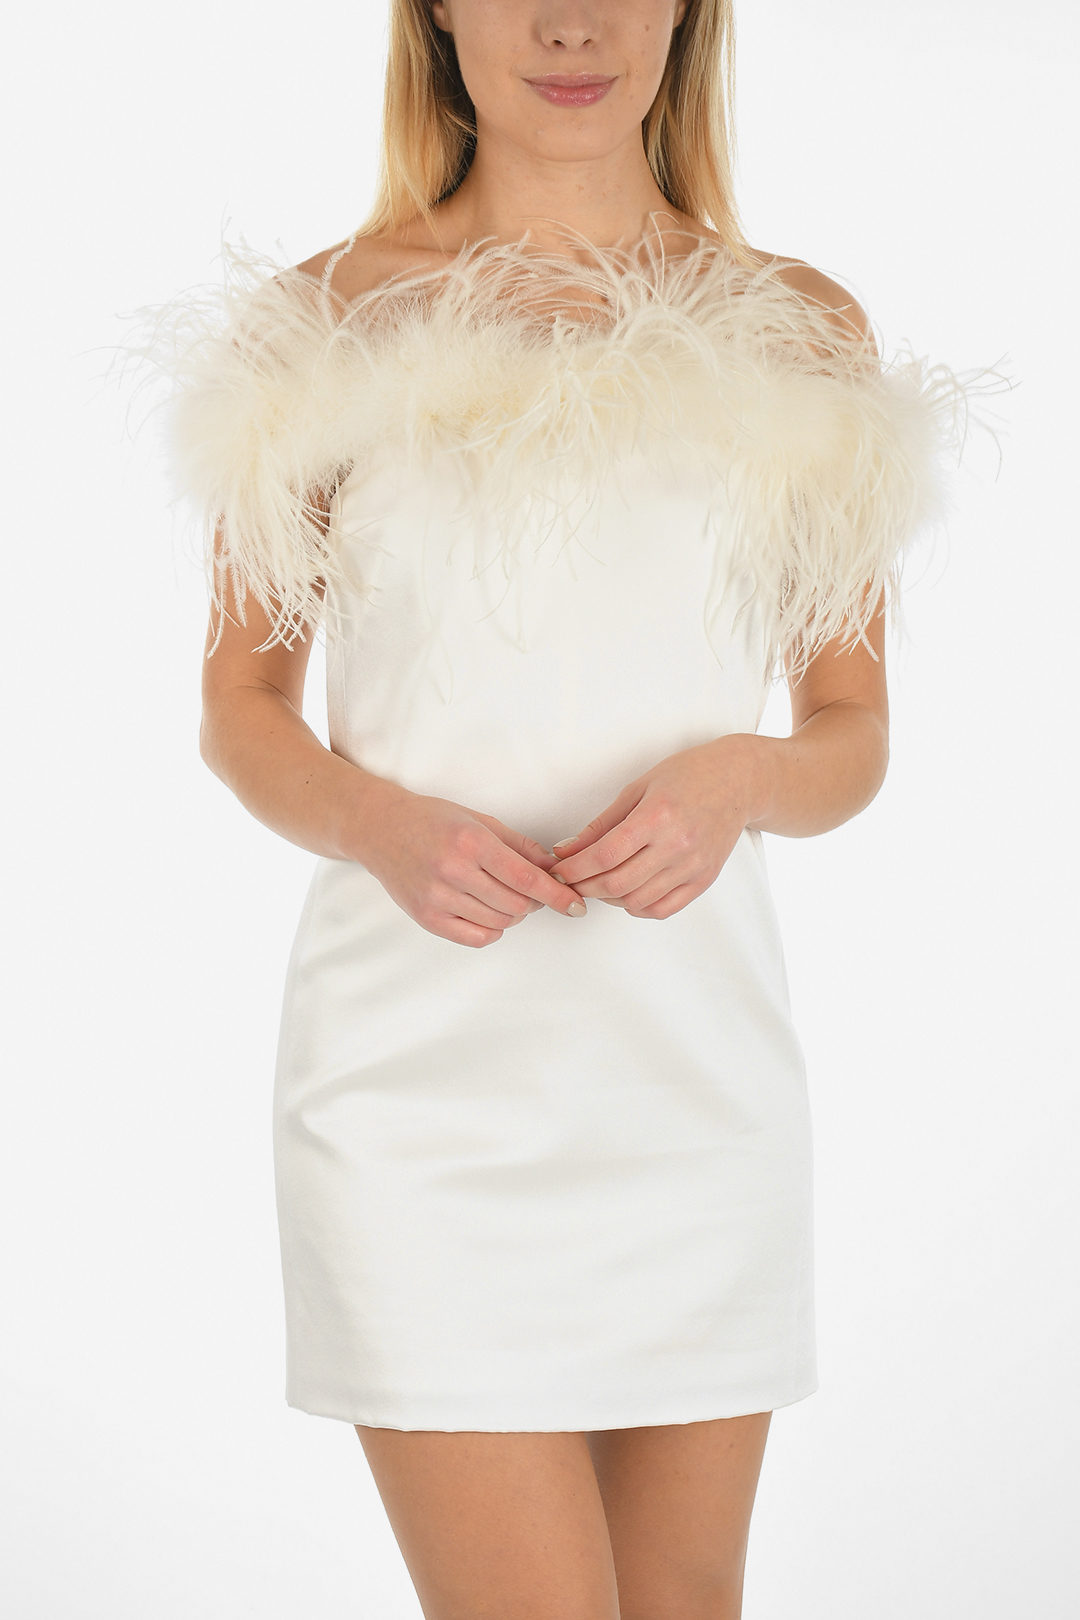 Saint Laurent satin mini dress with Ostrich feathers women - Glamood Outlet